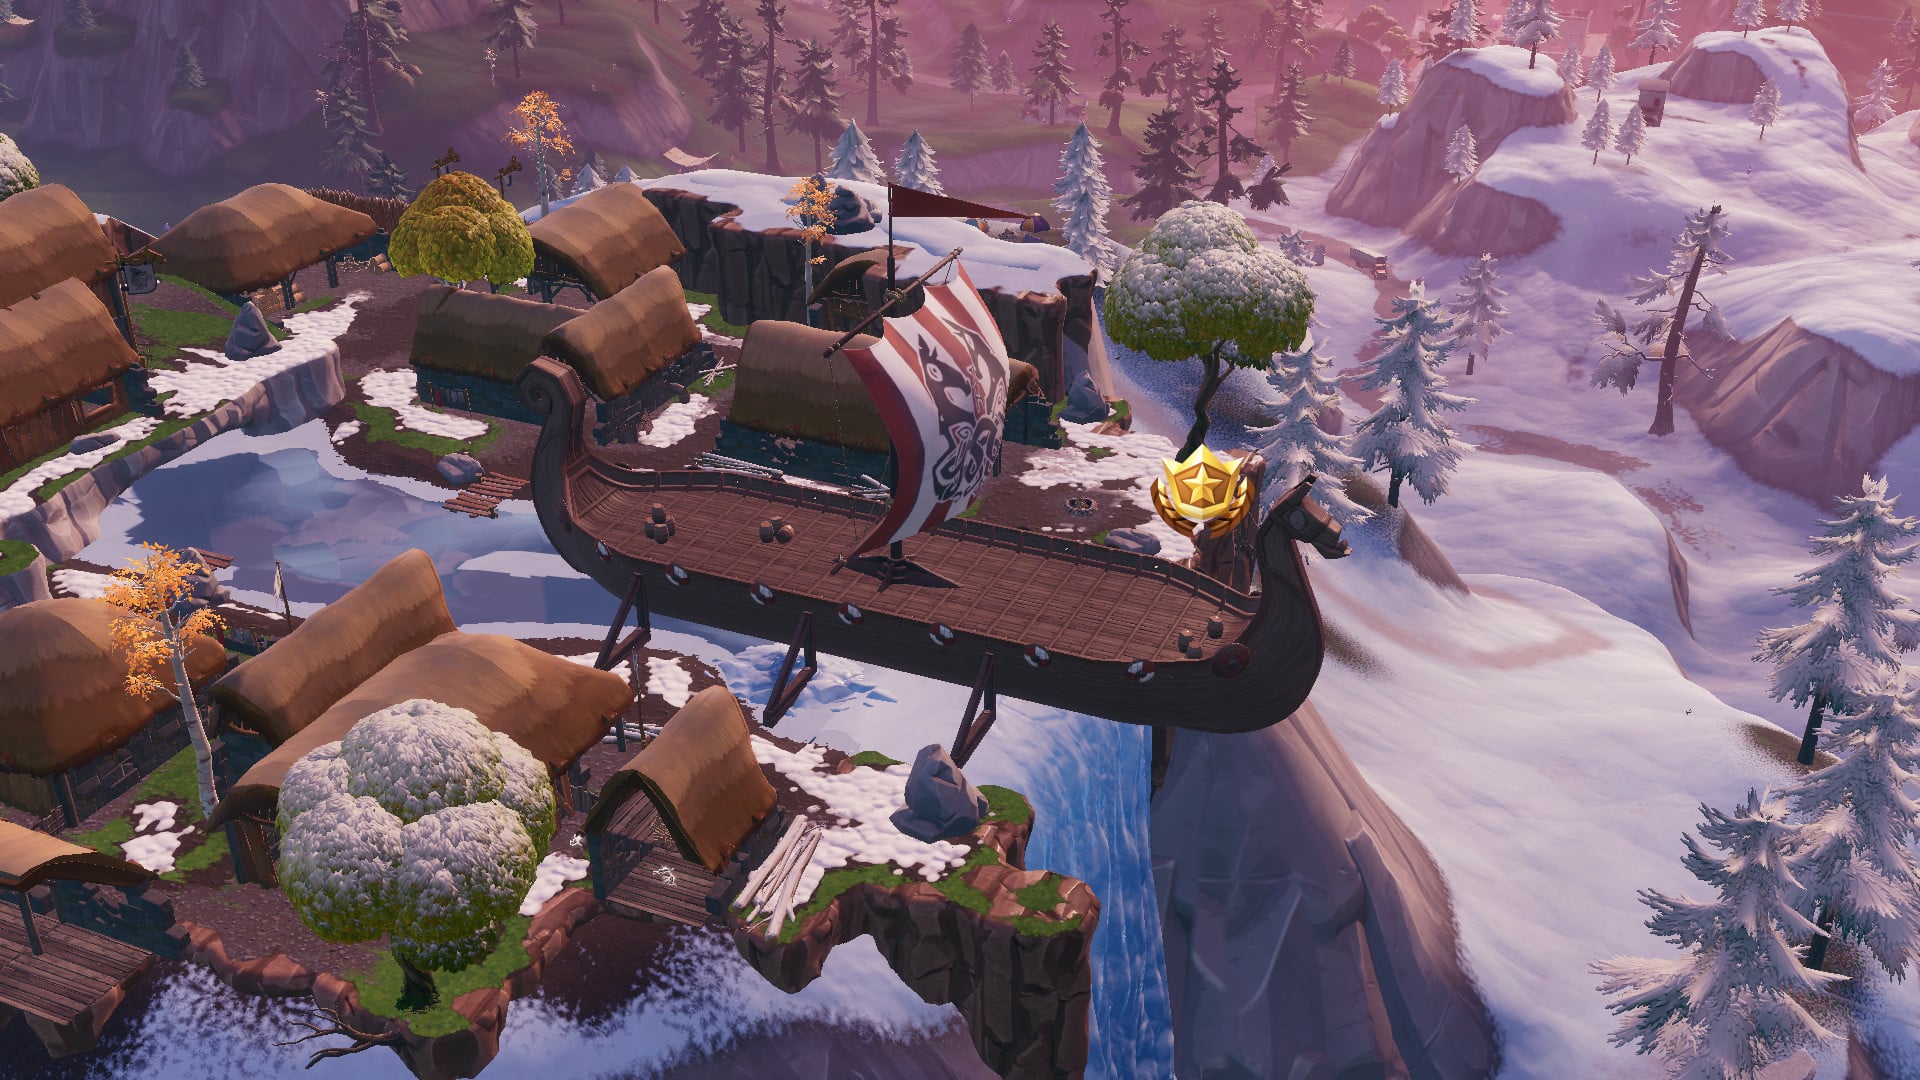 Fortnite Week 9 Secret Battle Star Location Season 8 - been added a few seasons ago we do believe however it will be necessary to build to obtain the secret battle star assigned for week 9 of season 8